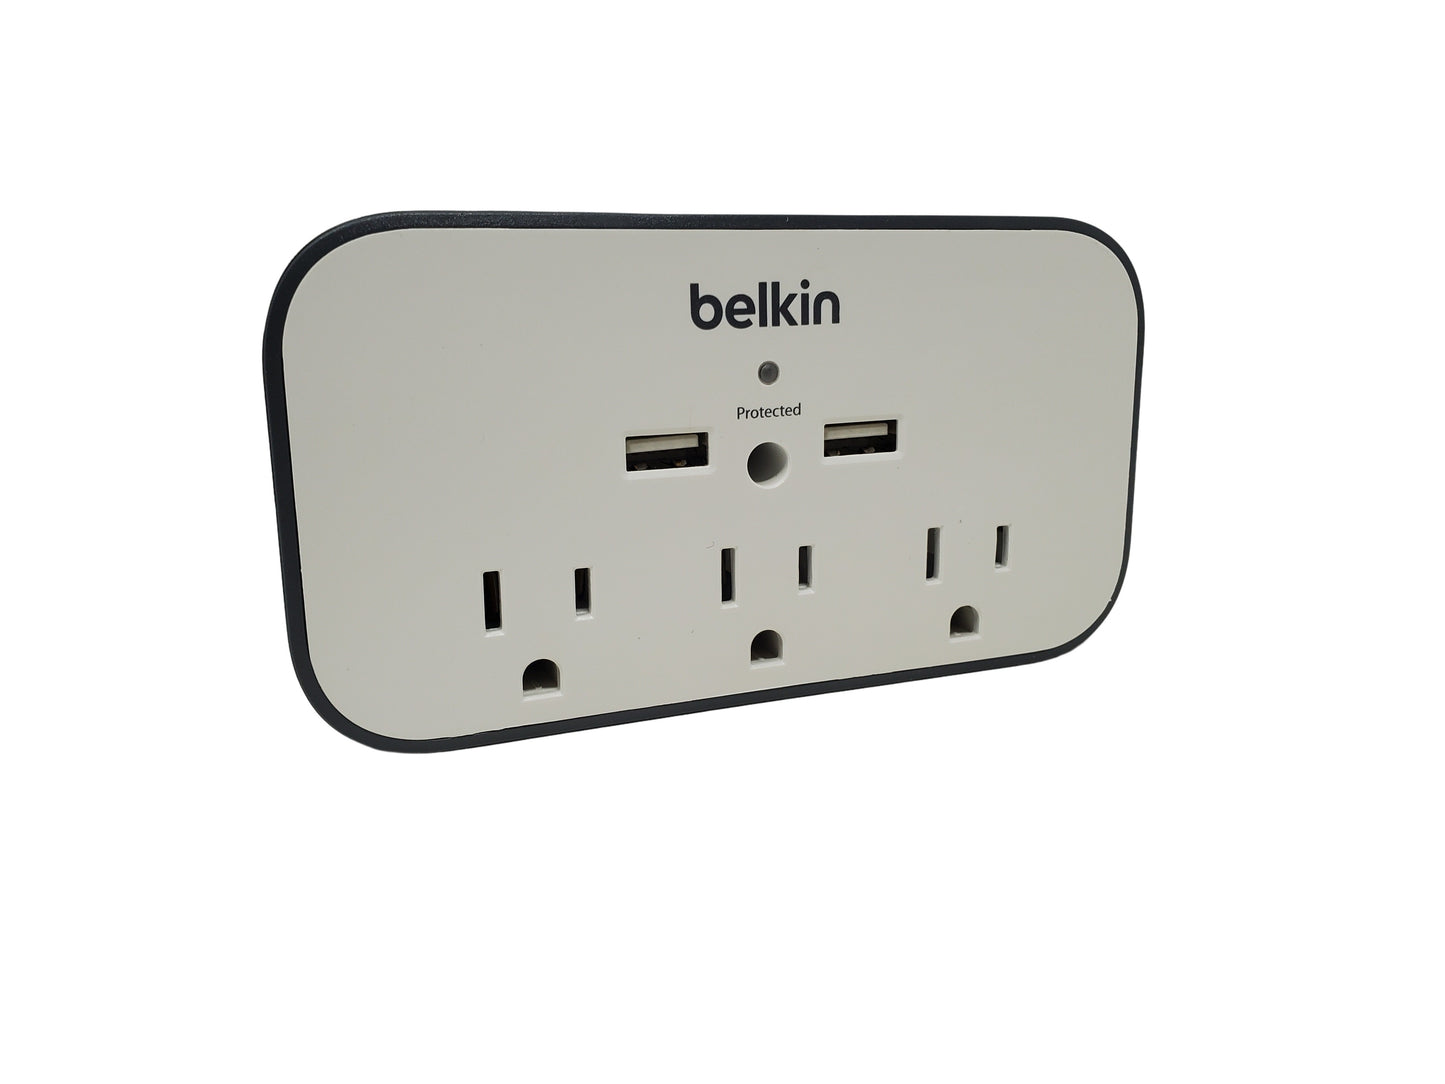 UHD 4k WiFI P2P Belkin Surge Protector Outlet Tap USB Charger Camera